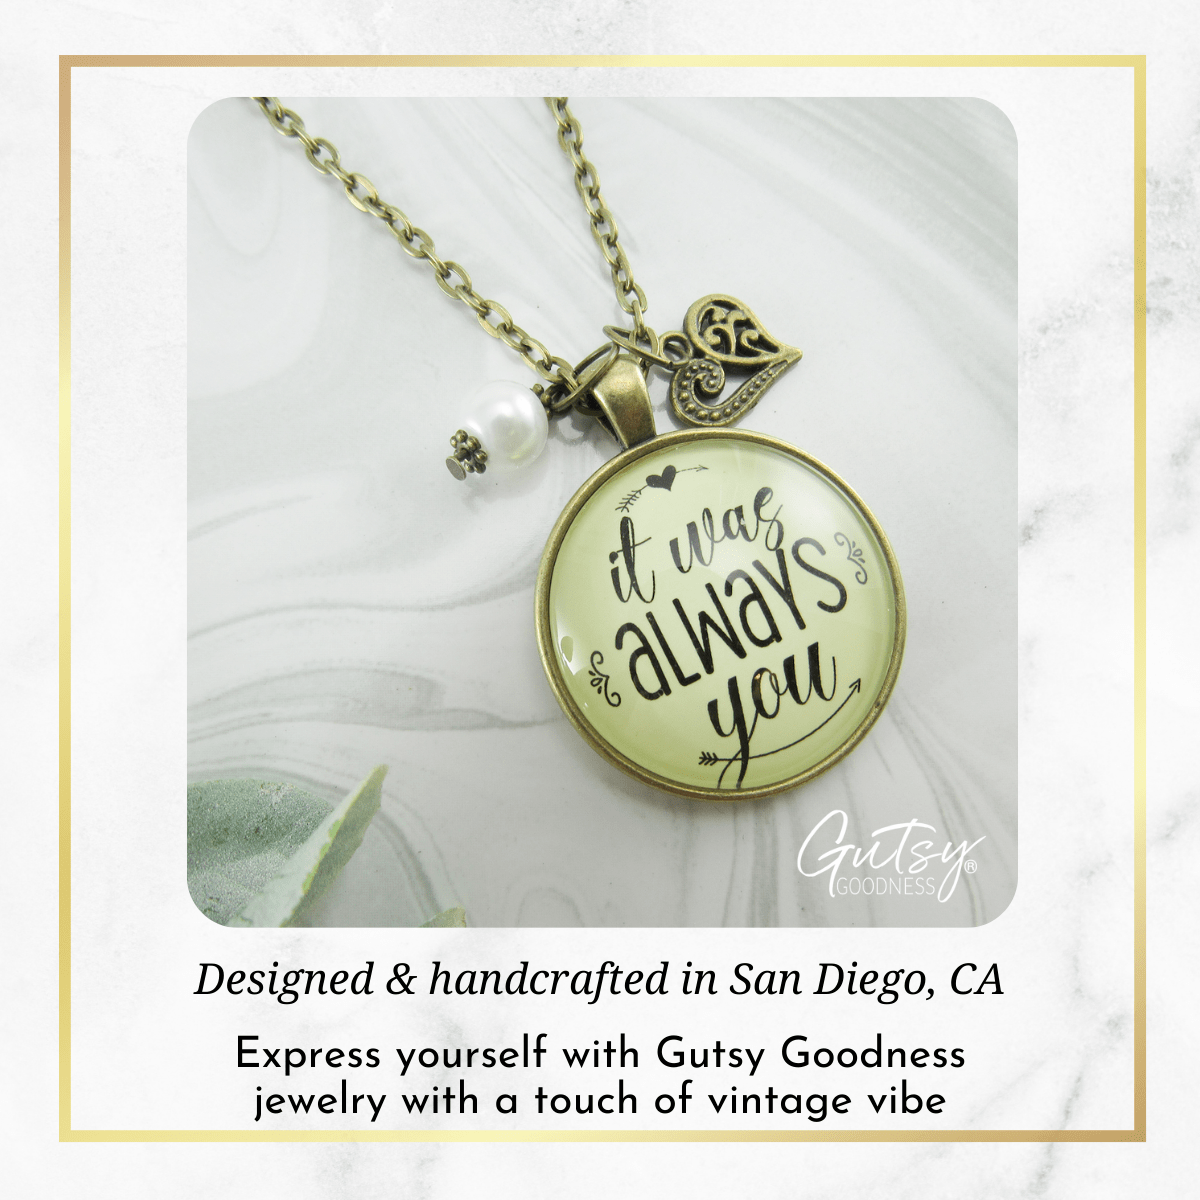 Gutsy Goodness It Was Always You Love Necklace Romantic Jewelry Heart Charm - Gutsy Goodness Handmade Jewelry;It Was Always You Love Necklace Romantic Jewelry Heart Charm - Gutsy Goodness Handmade Jewelry Gifts